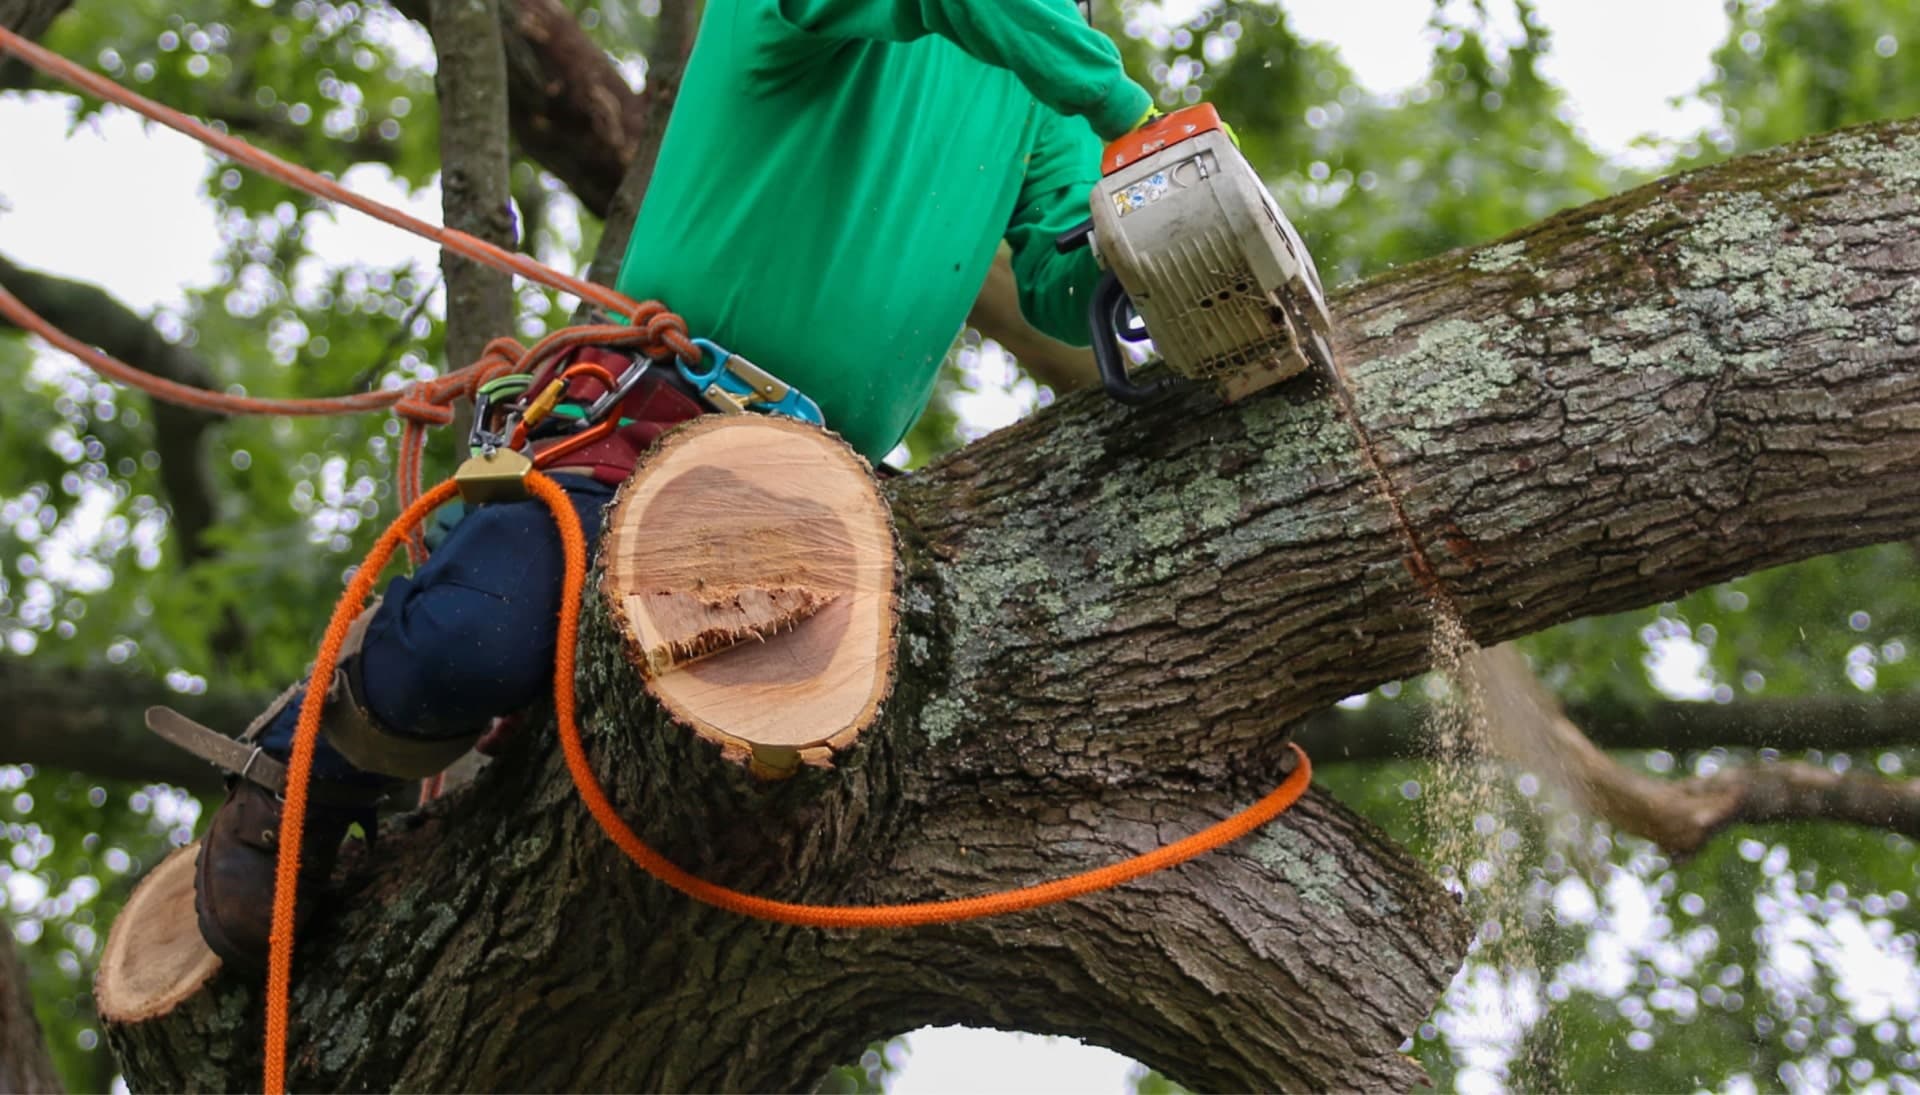 Shed your worries away with best tree removal in Orange County